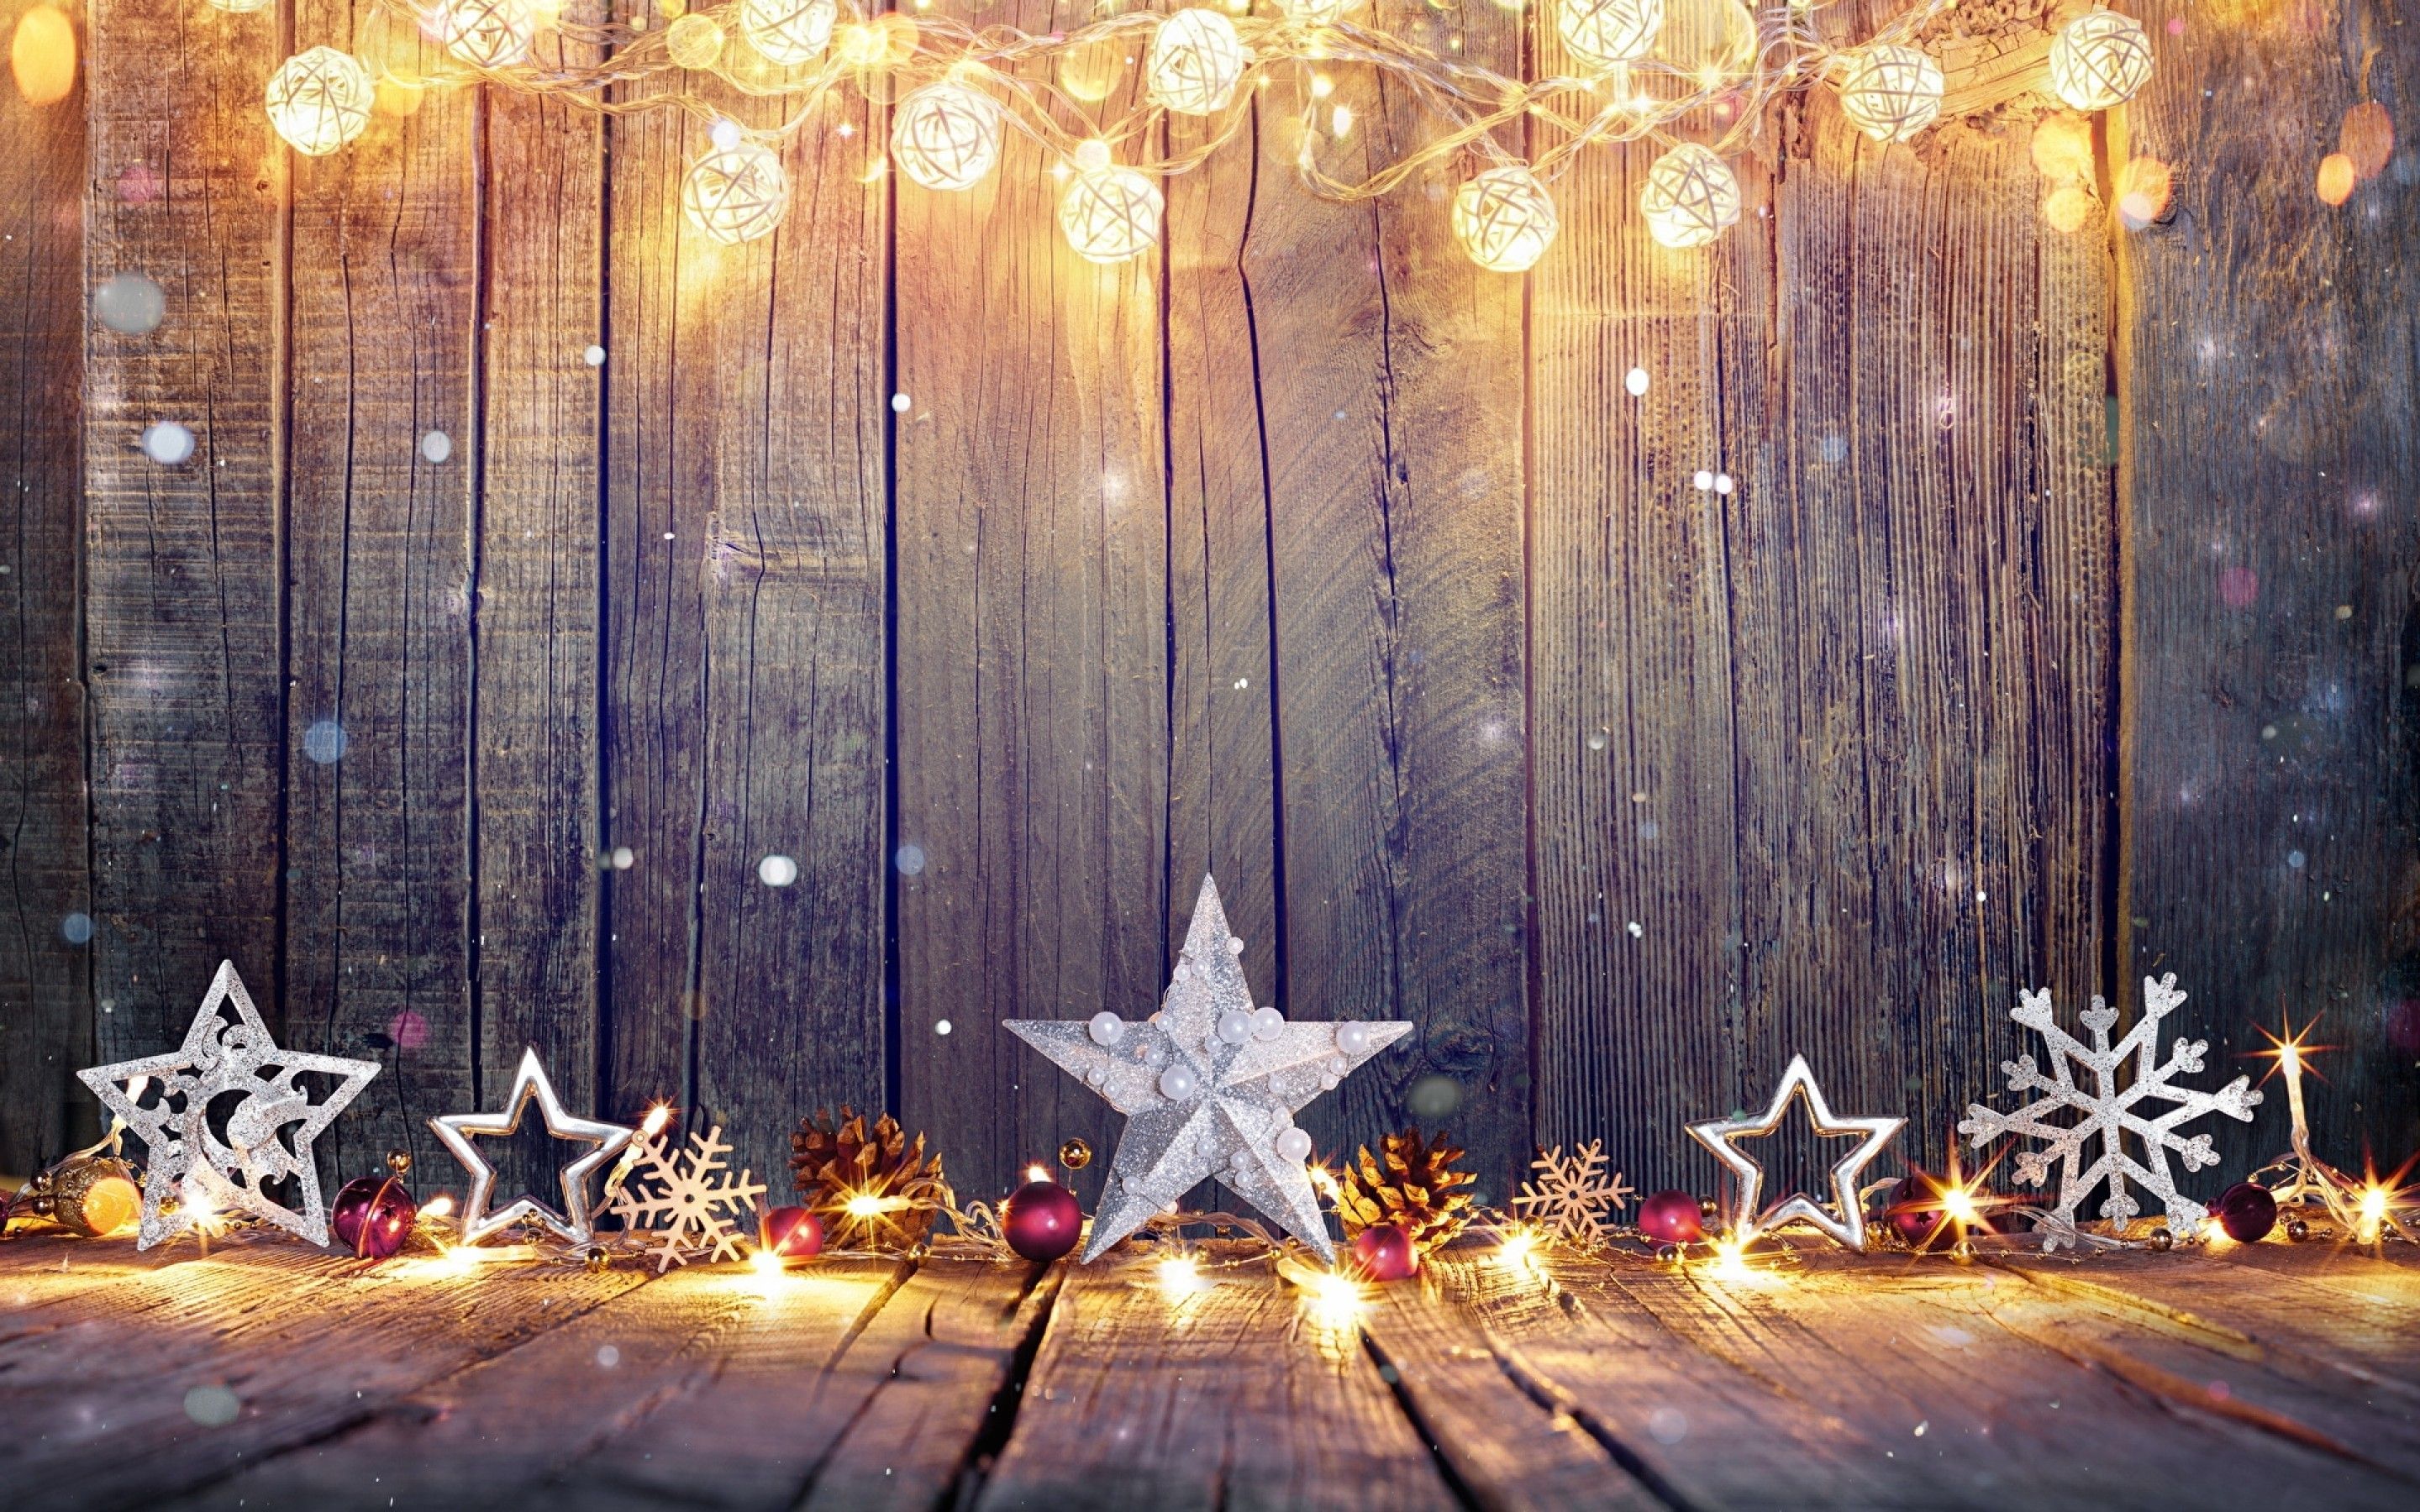 Download 2880x1800 Christmas, Lights, Holiday Wallpaper for MacBook Pro 15 inch